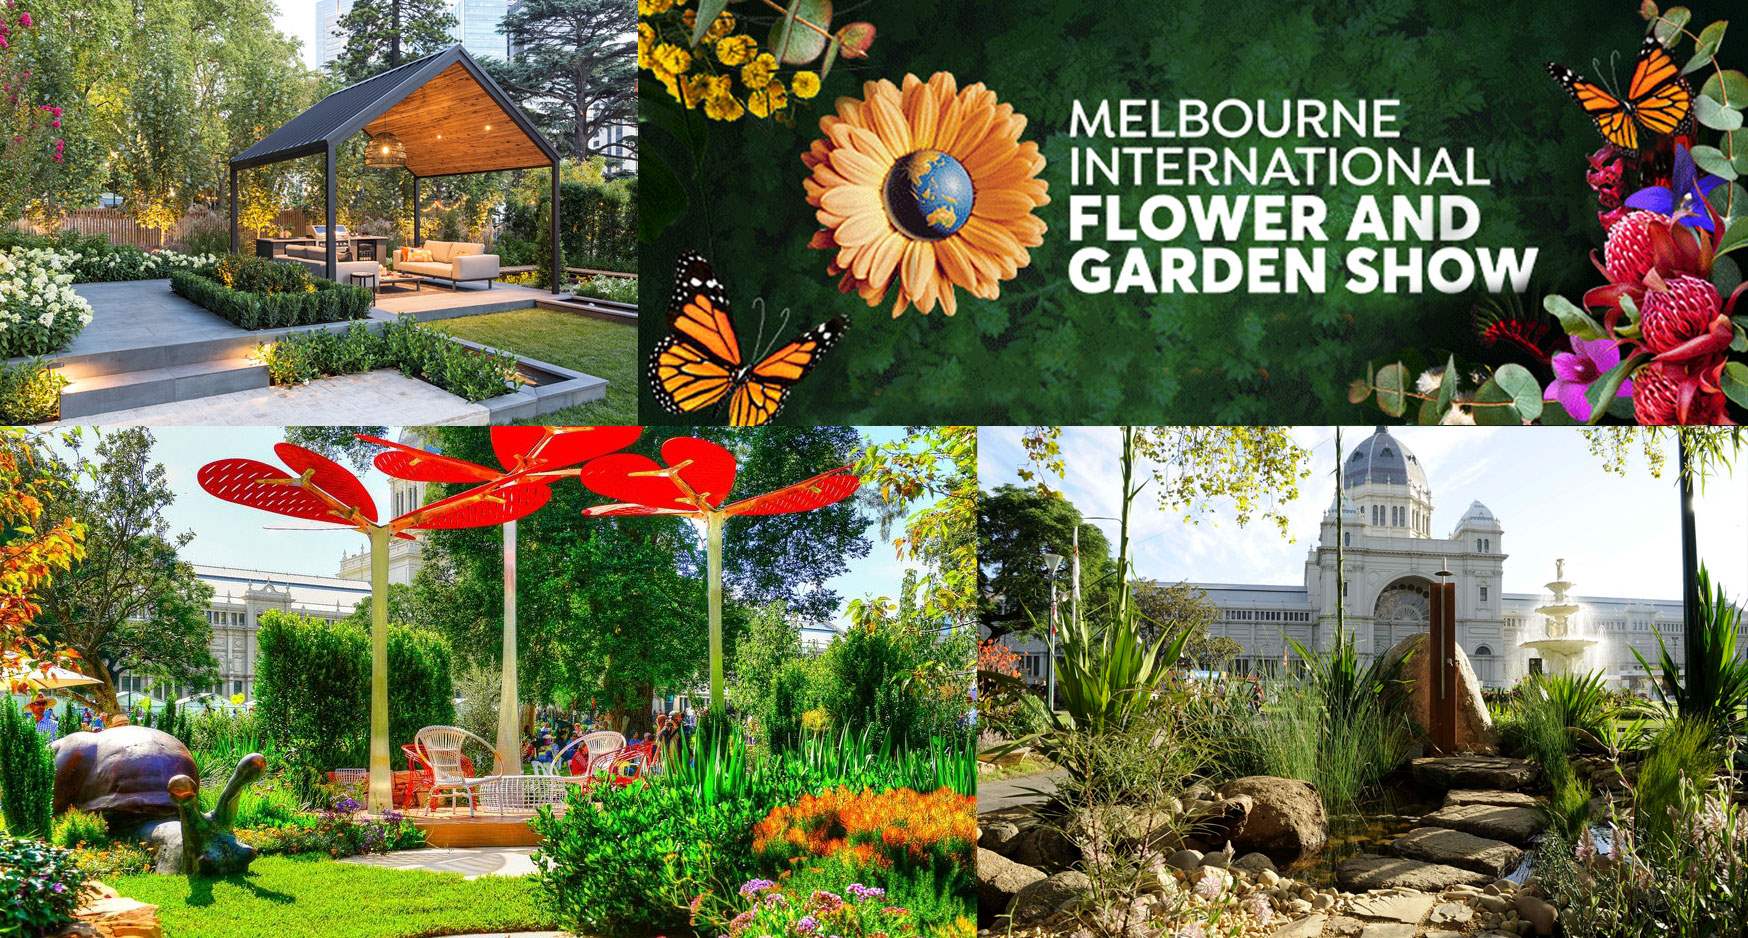 14 Facts About Melbourne International Flower And Garden Show